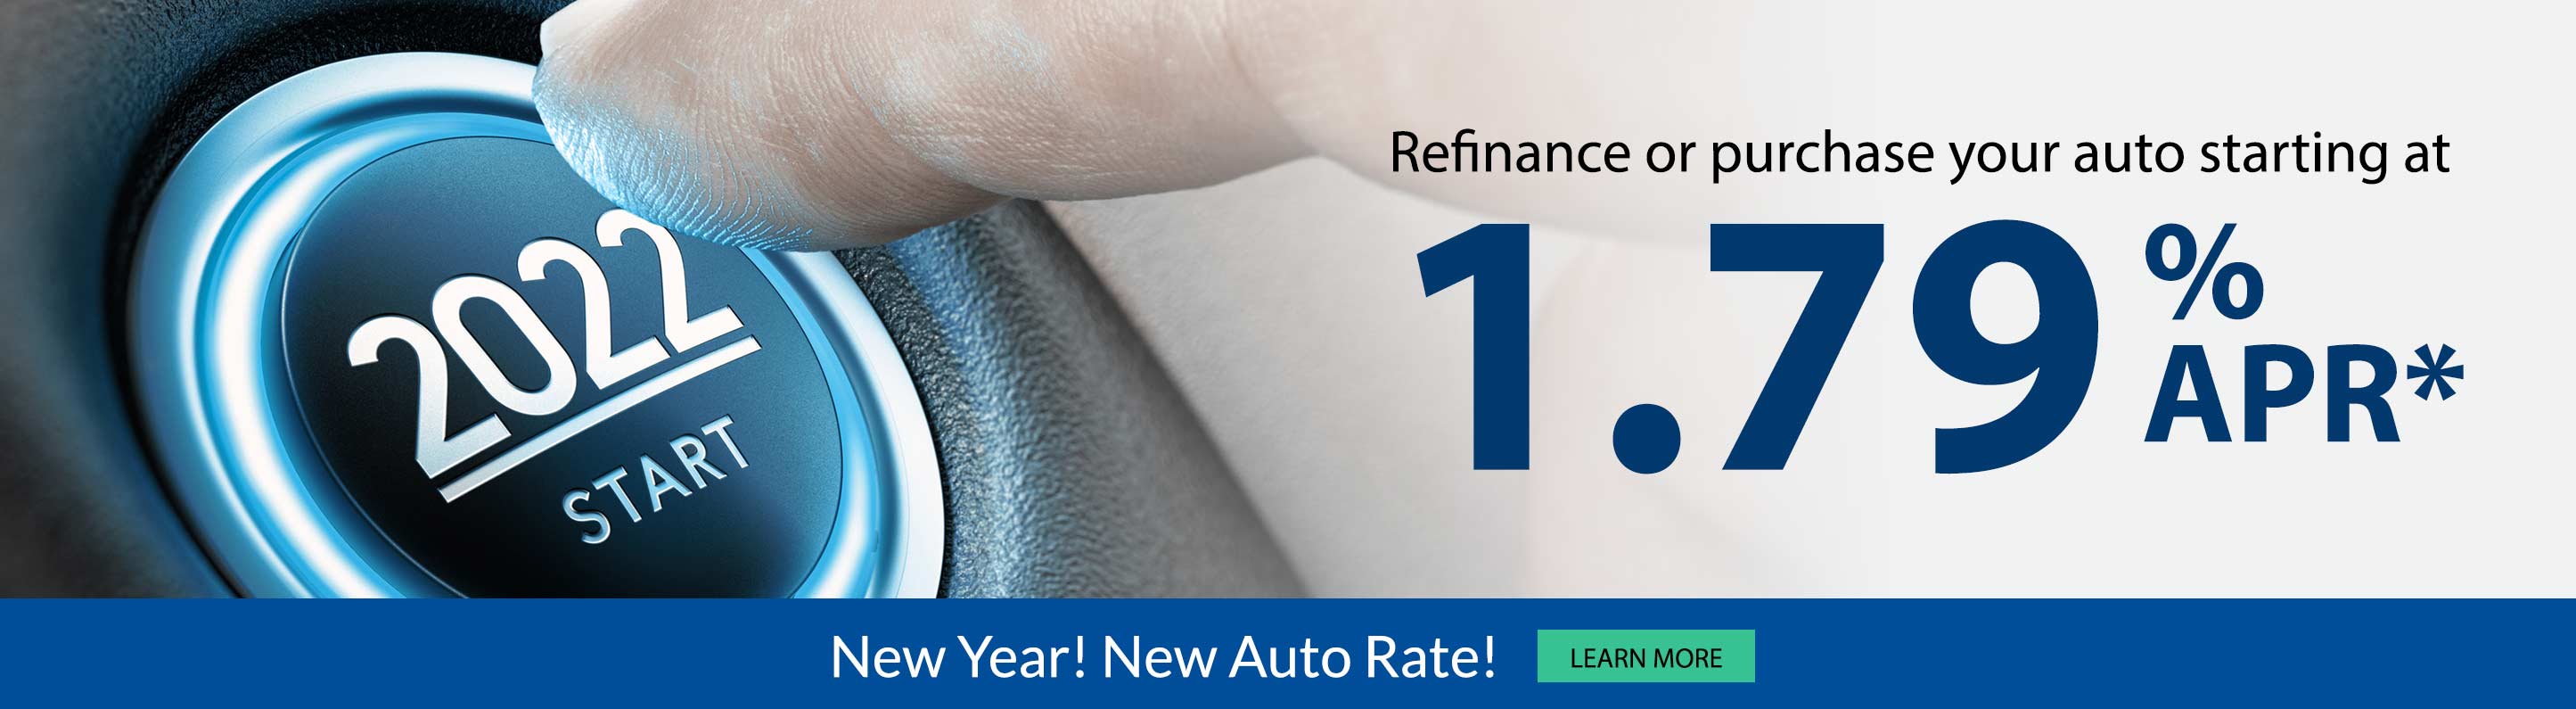 Refinance or purchase your auto starting at 1.79% APR. New Year! New Auto Rate!. Learn more